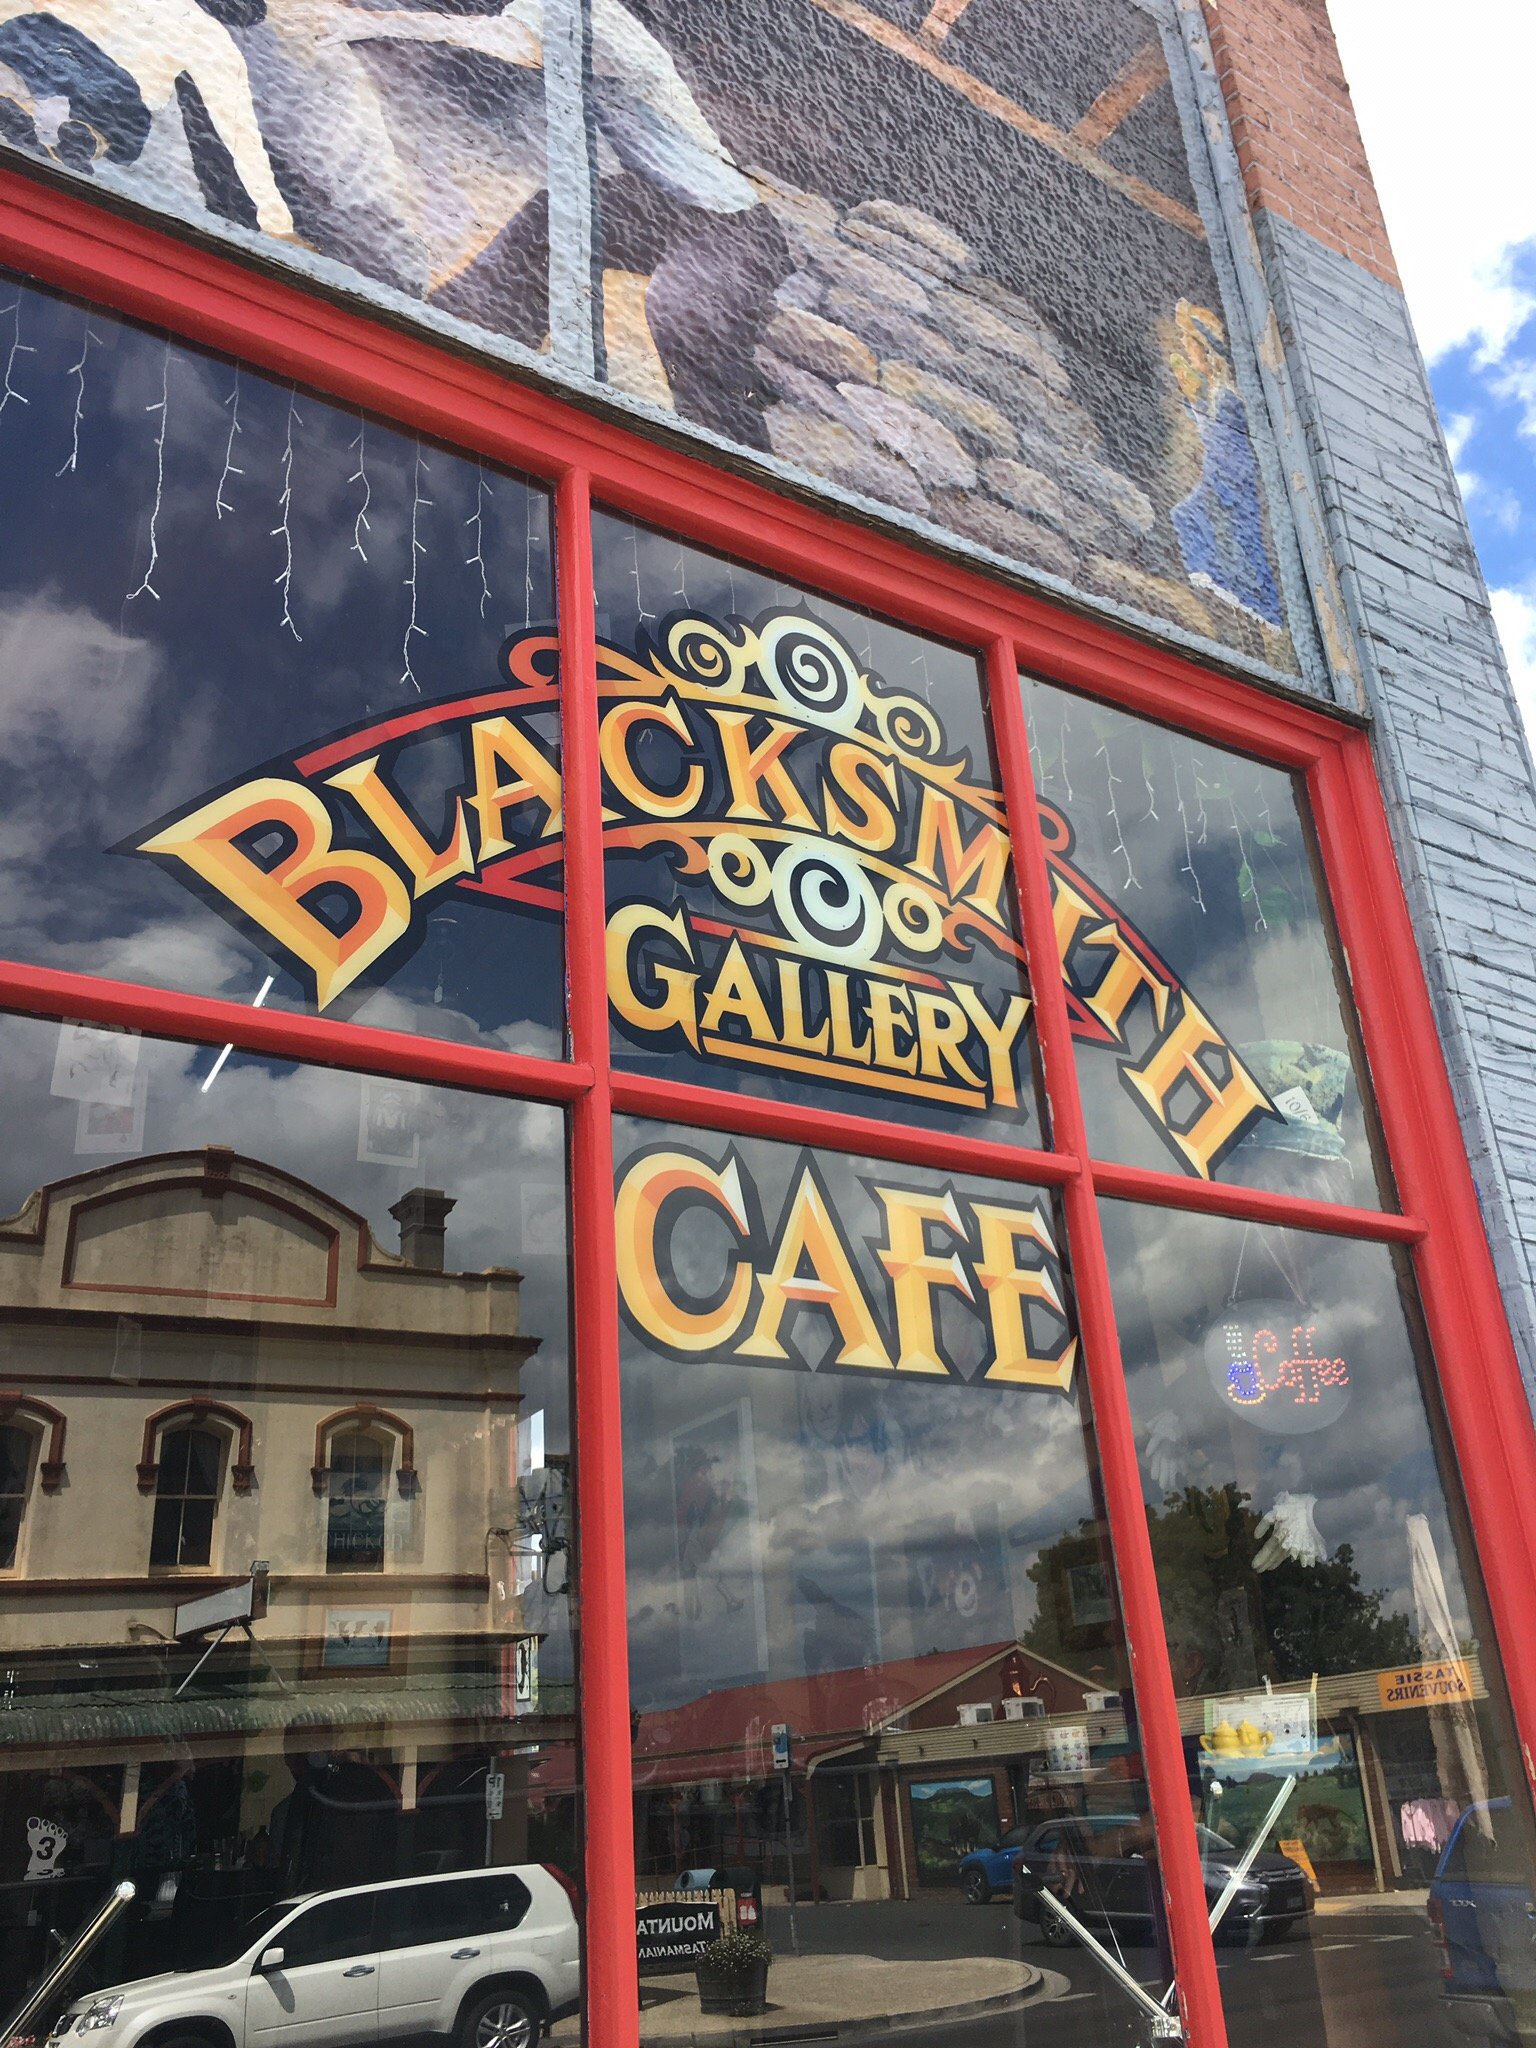 Blacksmith Gallery Cafe - Northern Rivers Accommodation